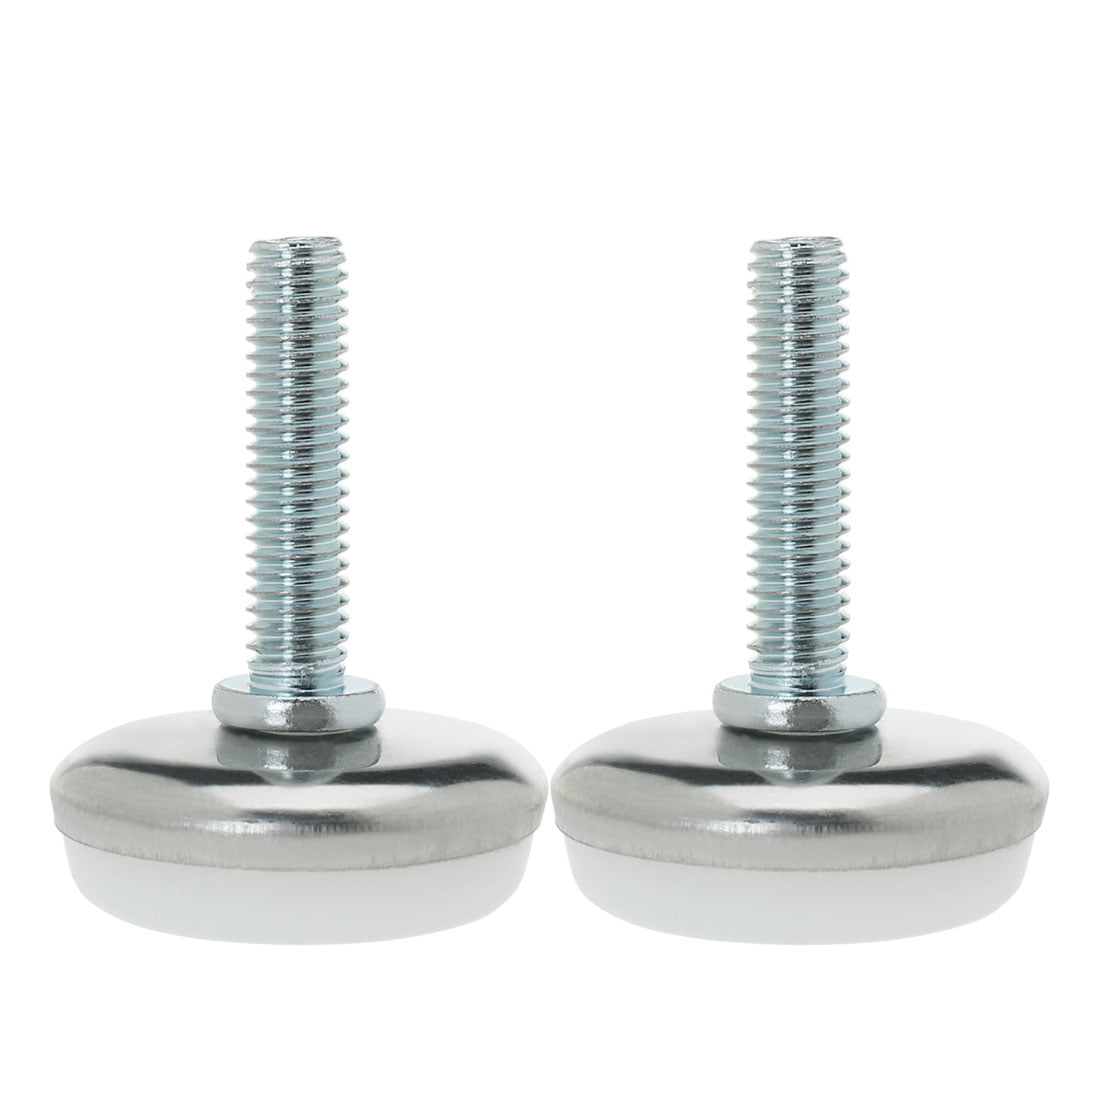 2Pcs M6 x 30mm Threaded Adjustable Rod Levelling Foot for Chair Table 